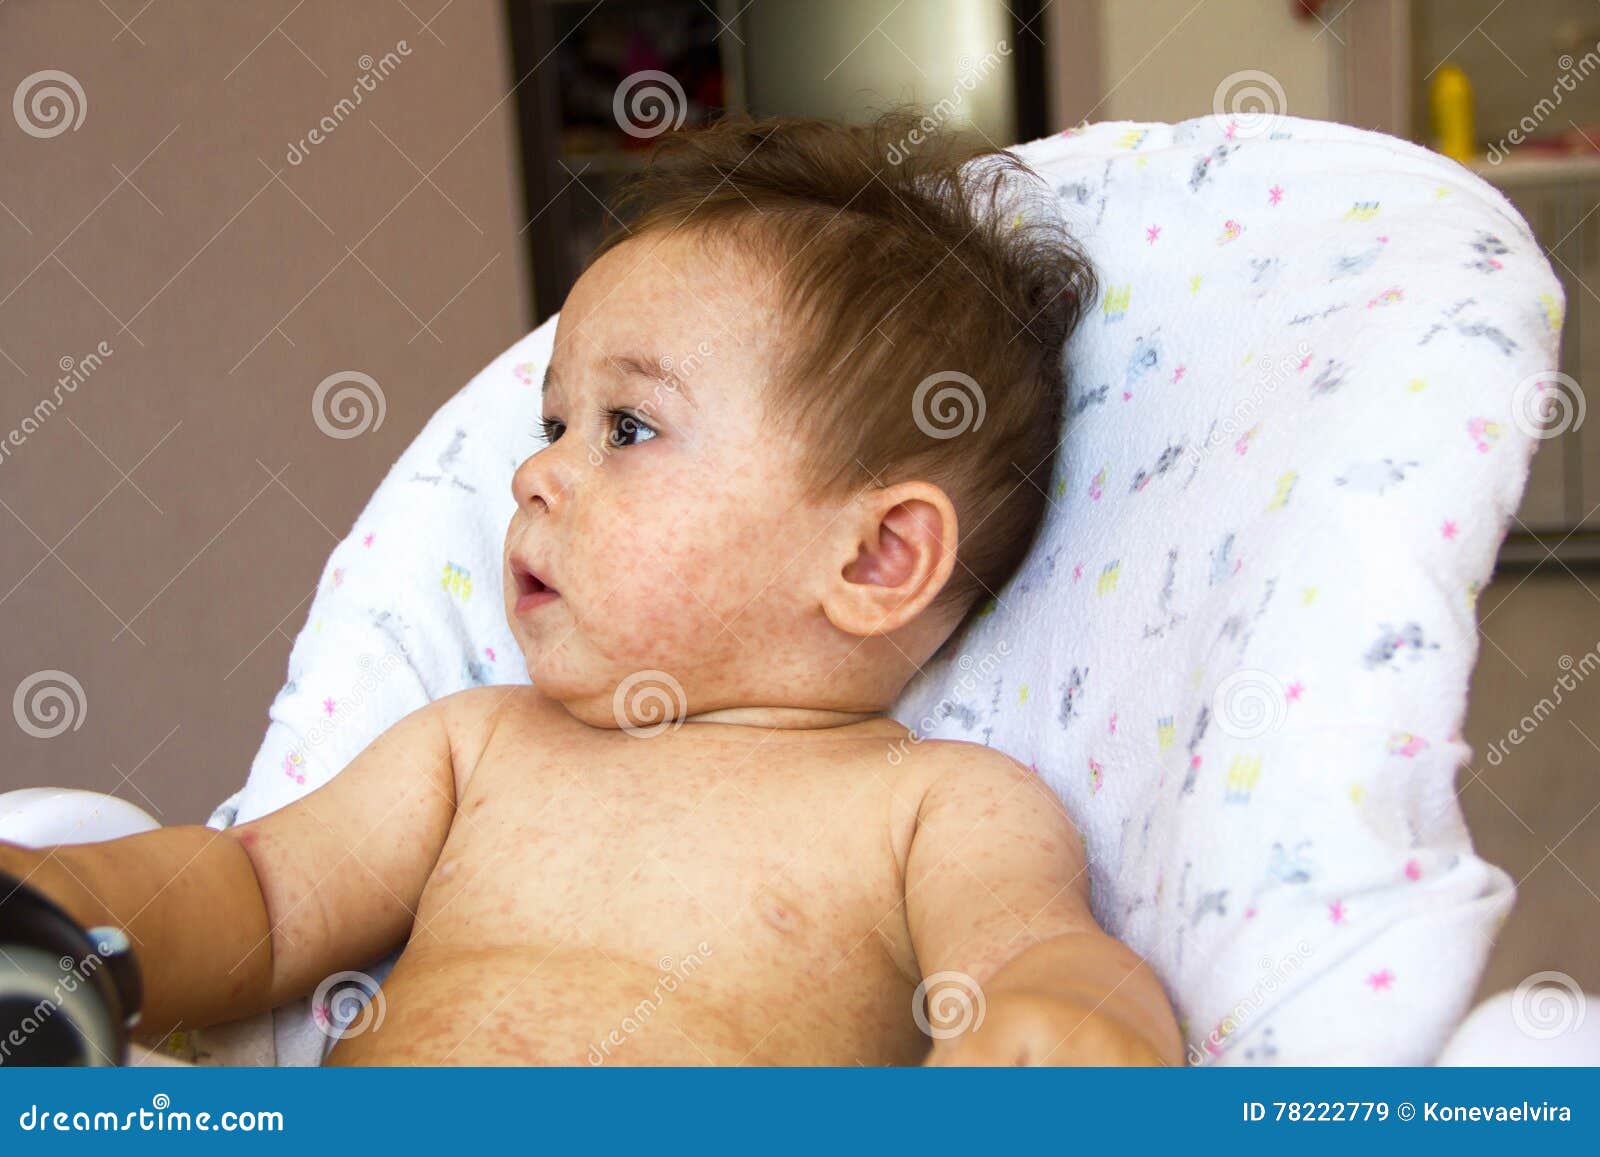 Baby With Dermatitis Problem Of Rash Allergy Suffering From Food